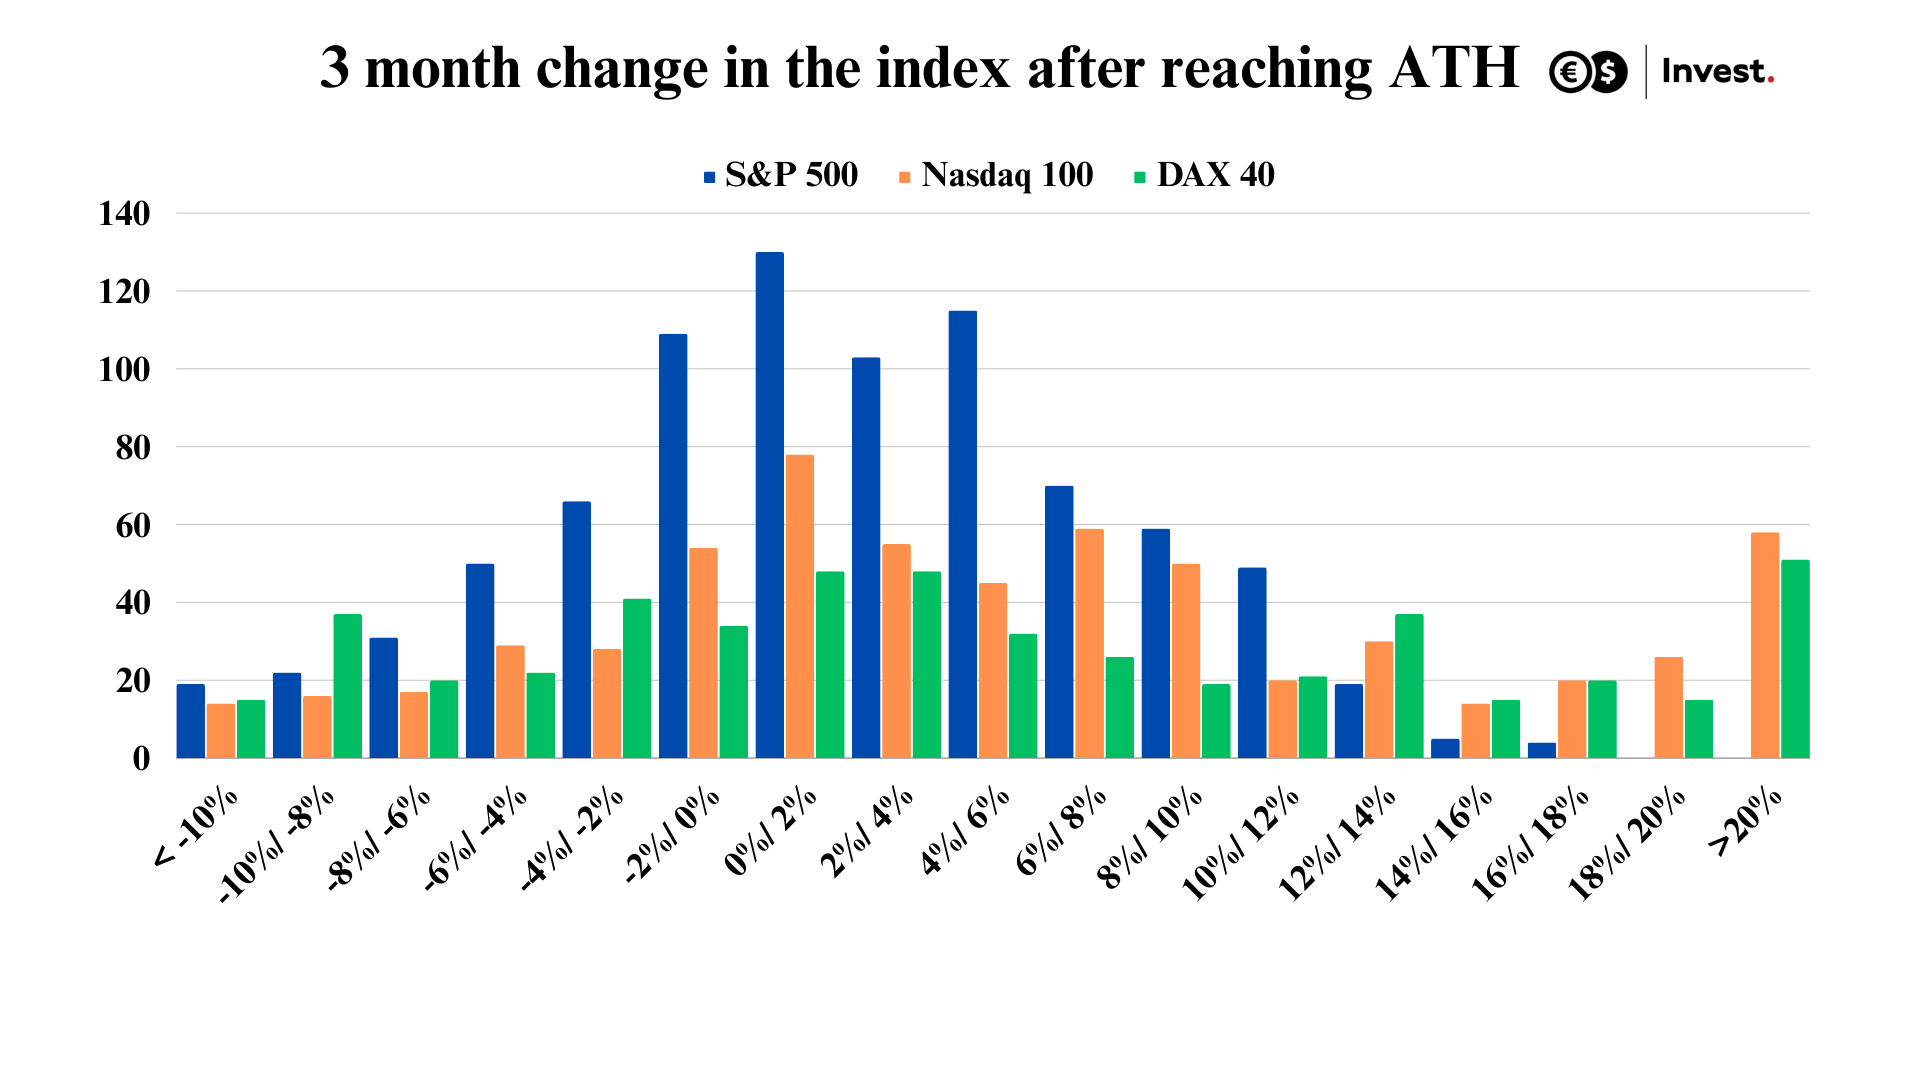 chart of the index change after ATH